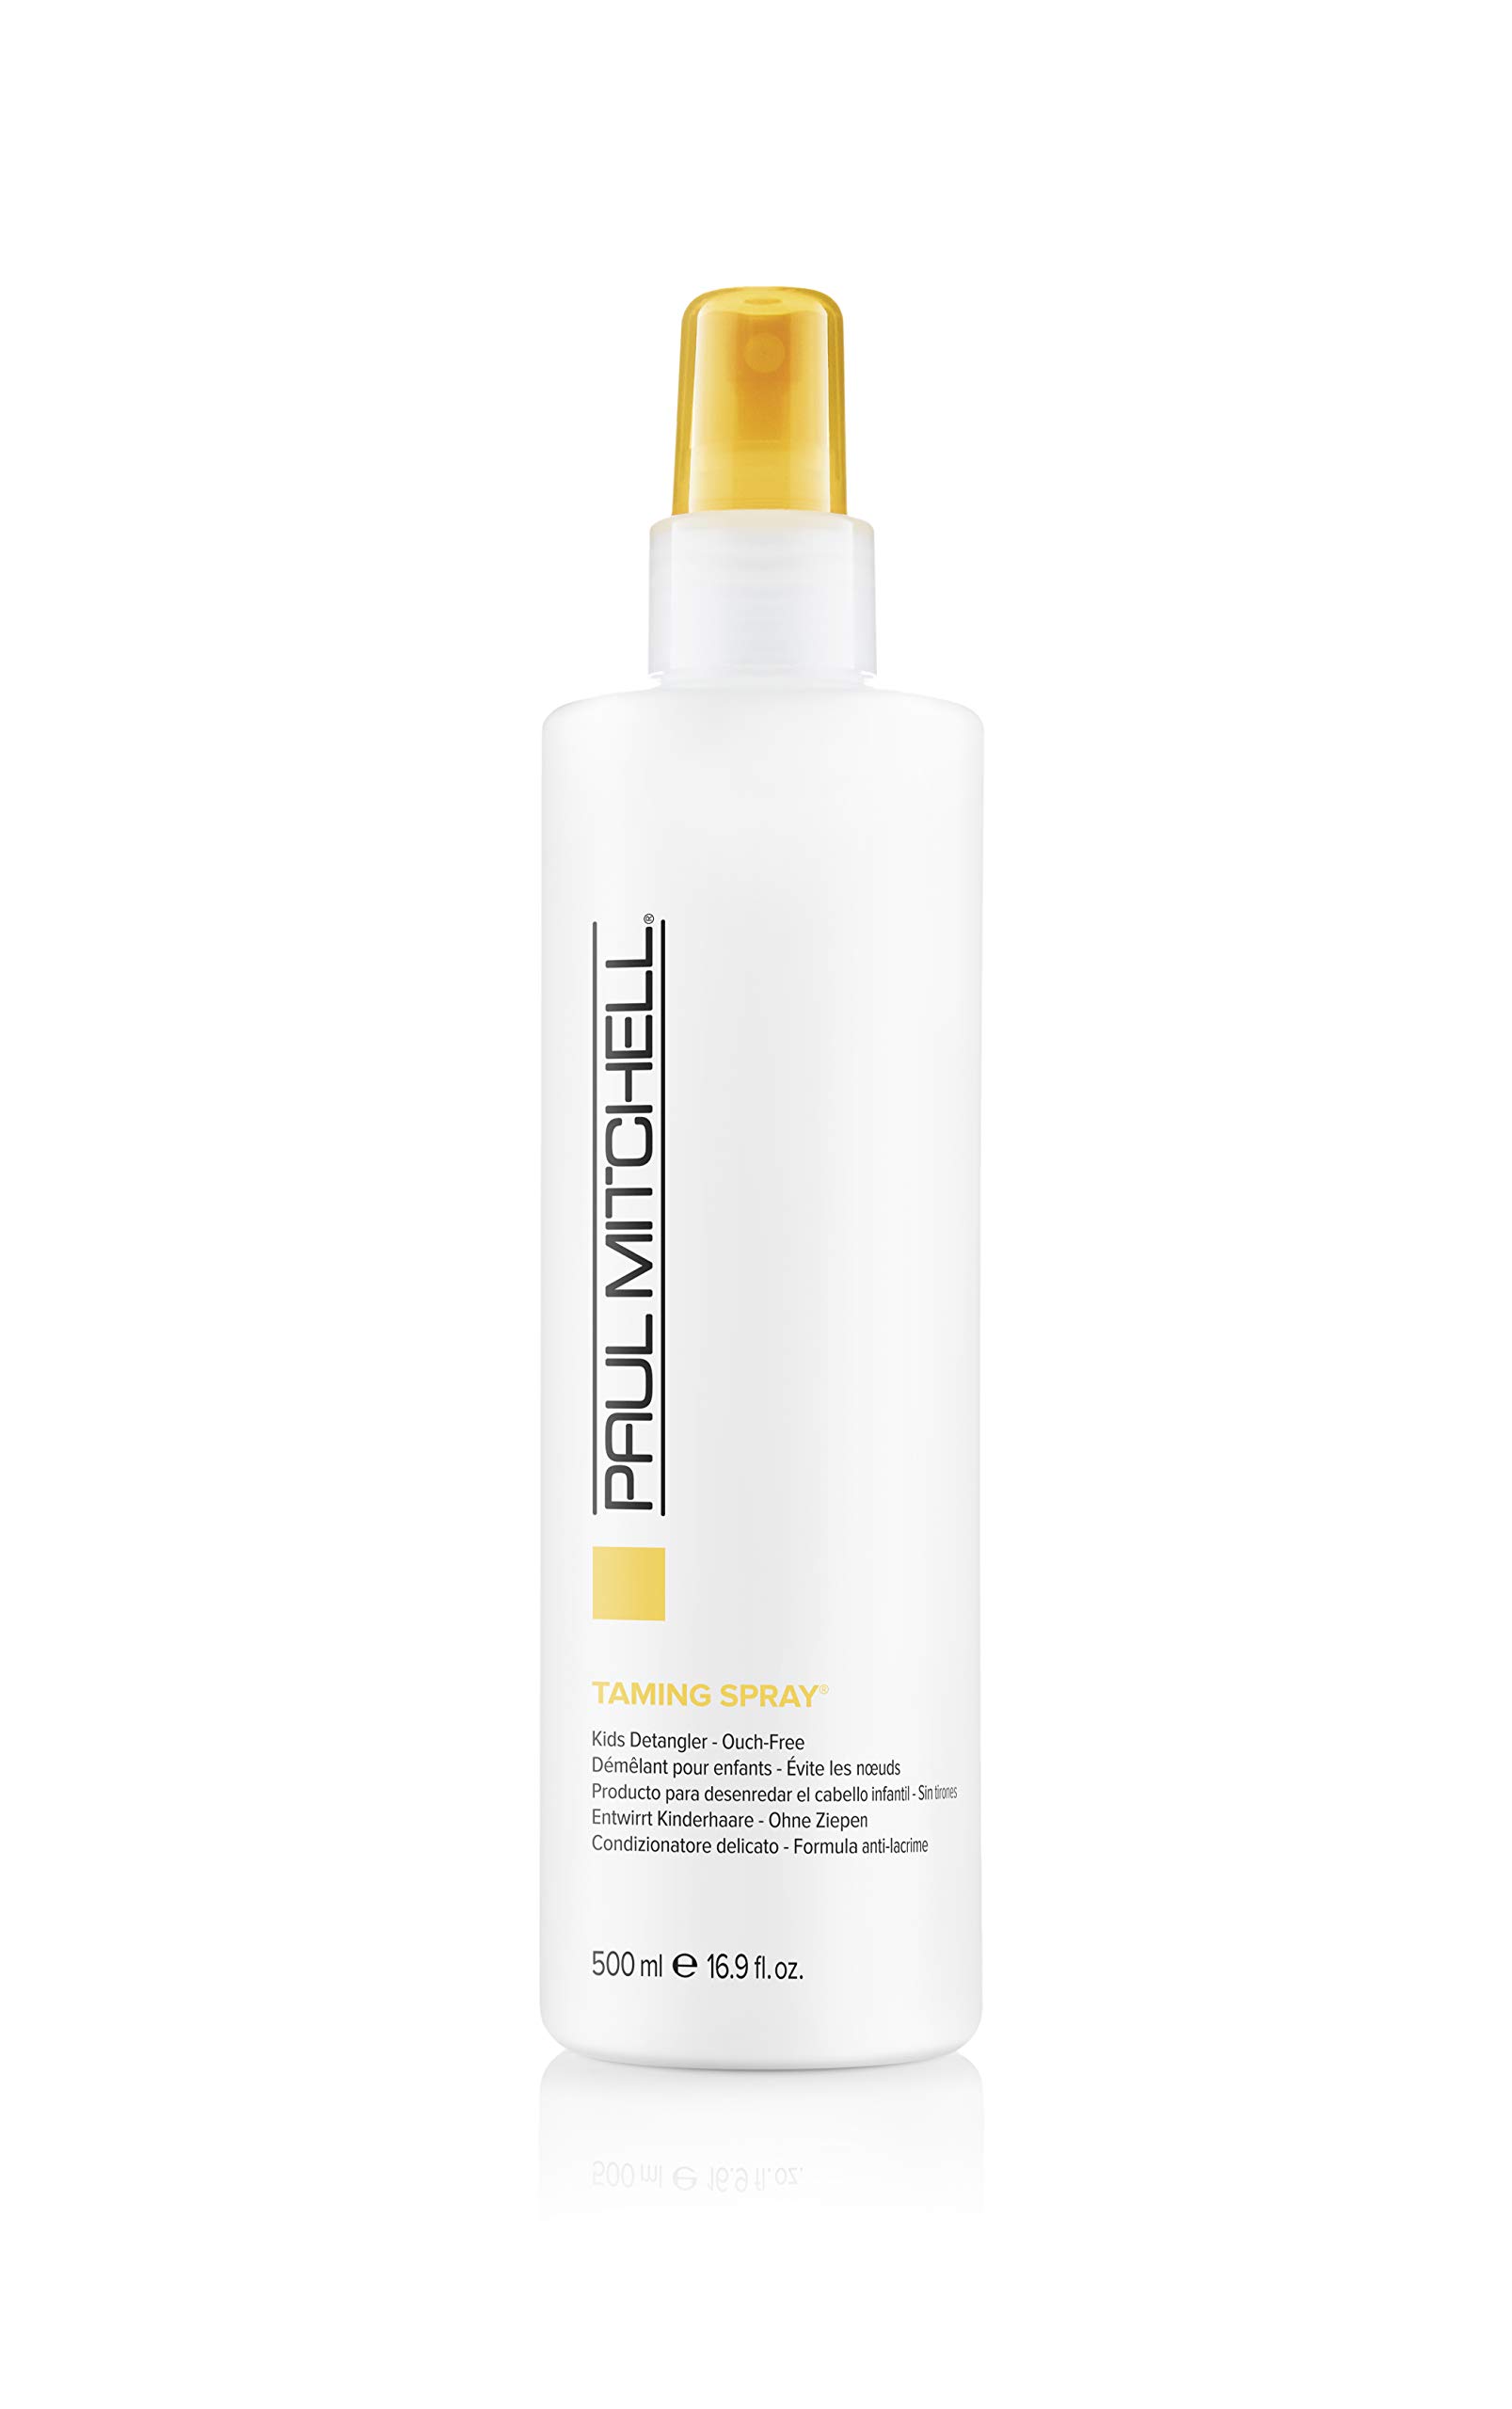 Paul Mitchell Taming Spray, Kids Detangler, Ouch-Free, For All Hair Types